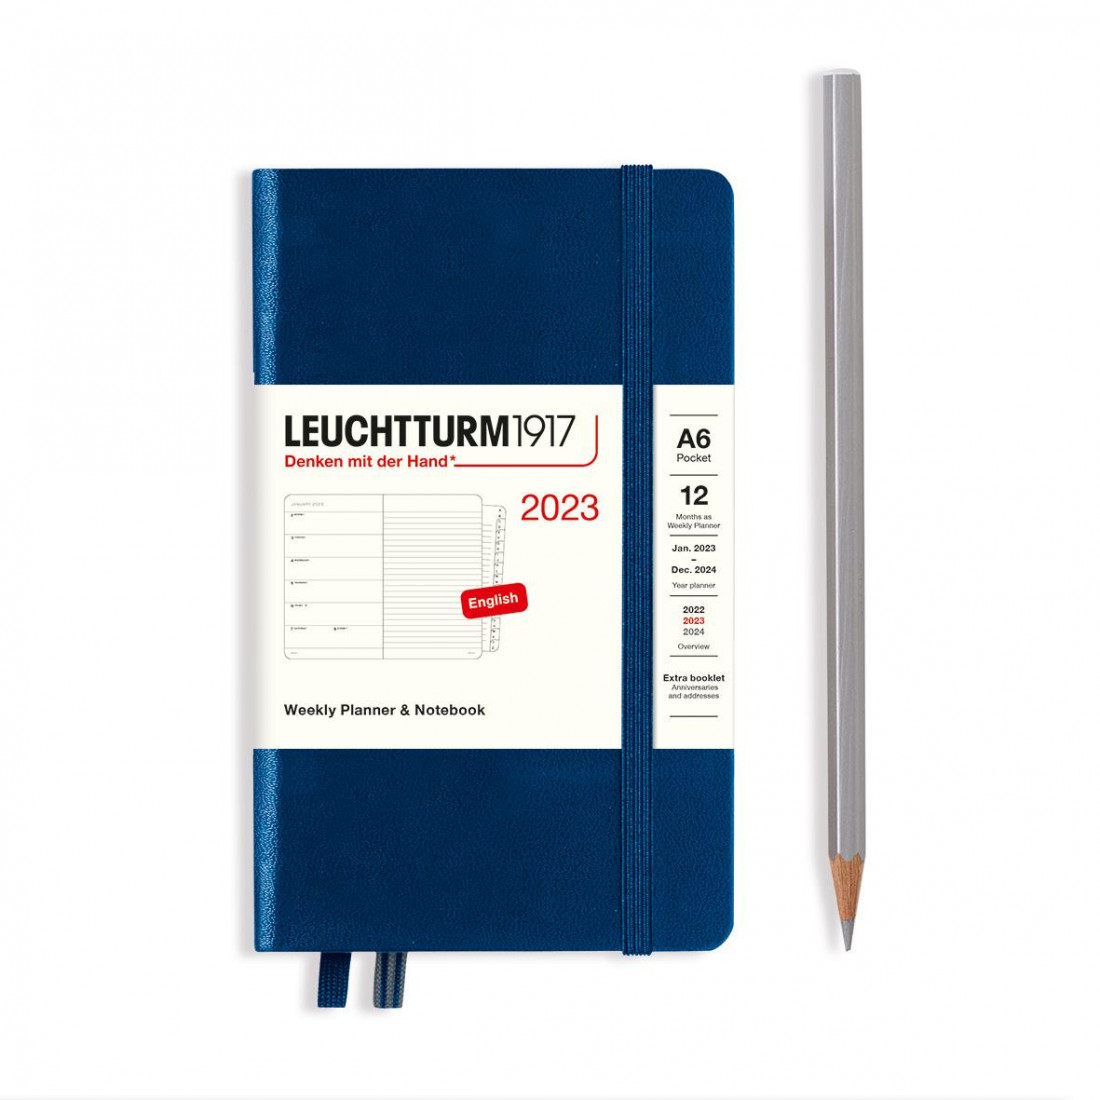 Leuchttrum 1917 Weekly Planner and Notebook 2023, Olive, A6, english